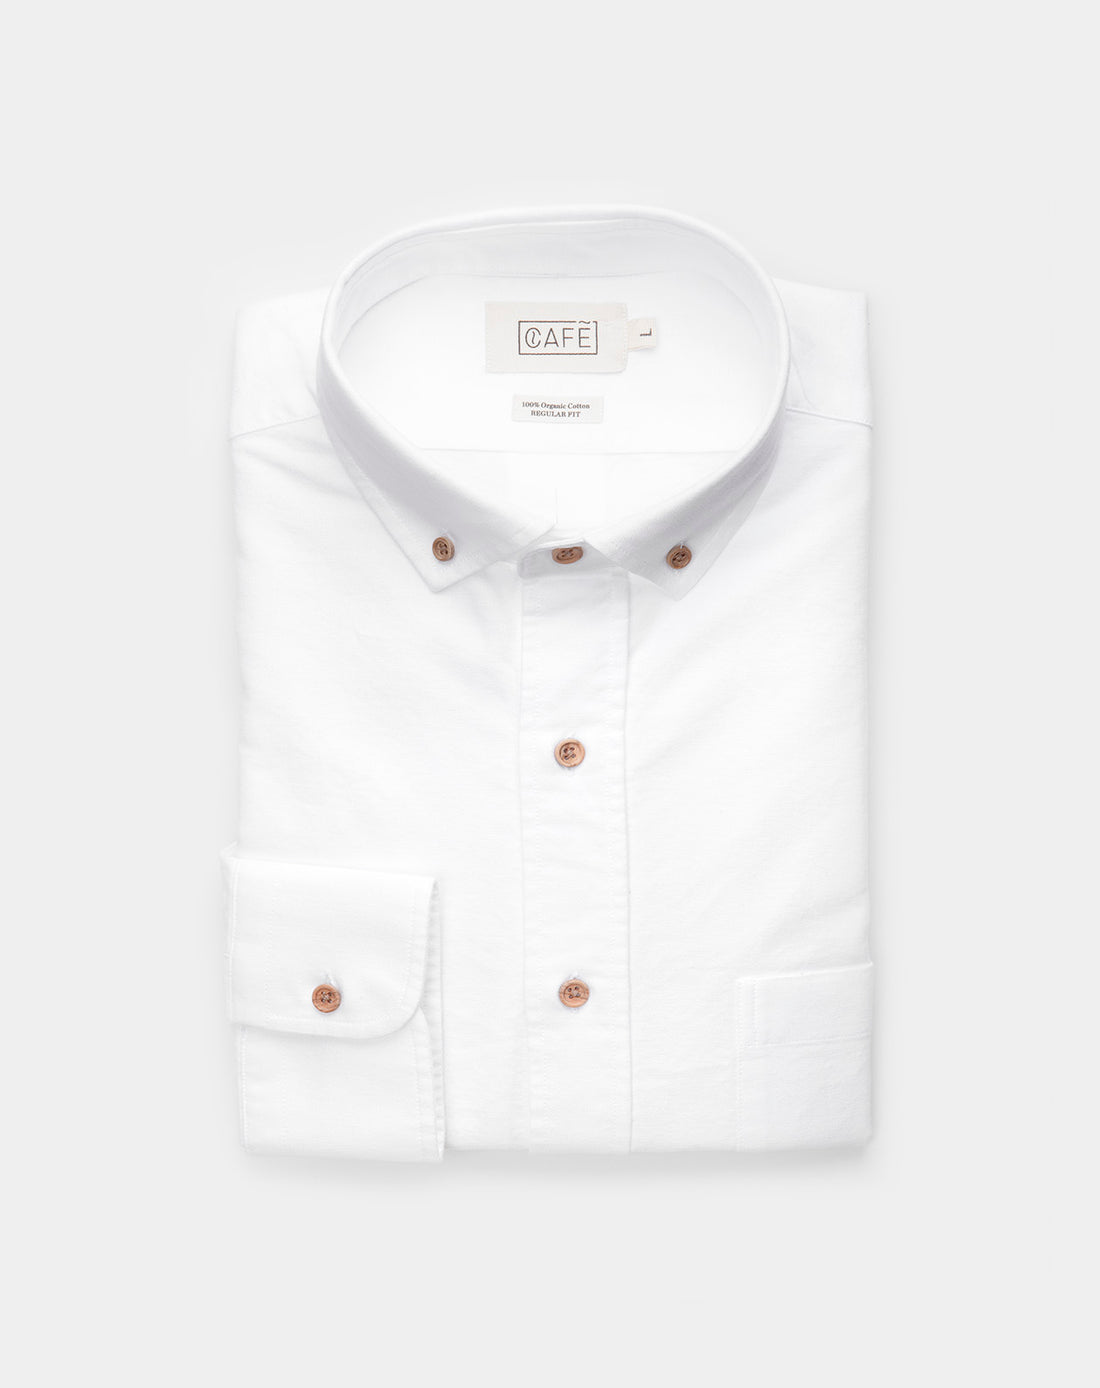 The Everyday Oxford Button-Down Shirt in White